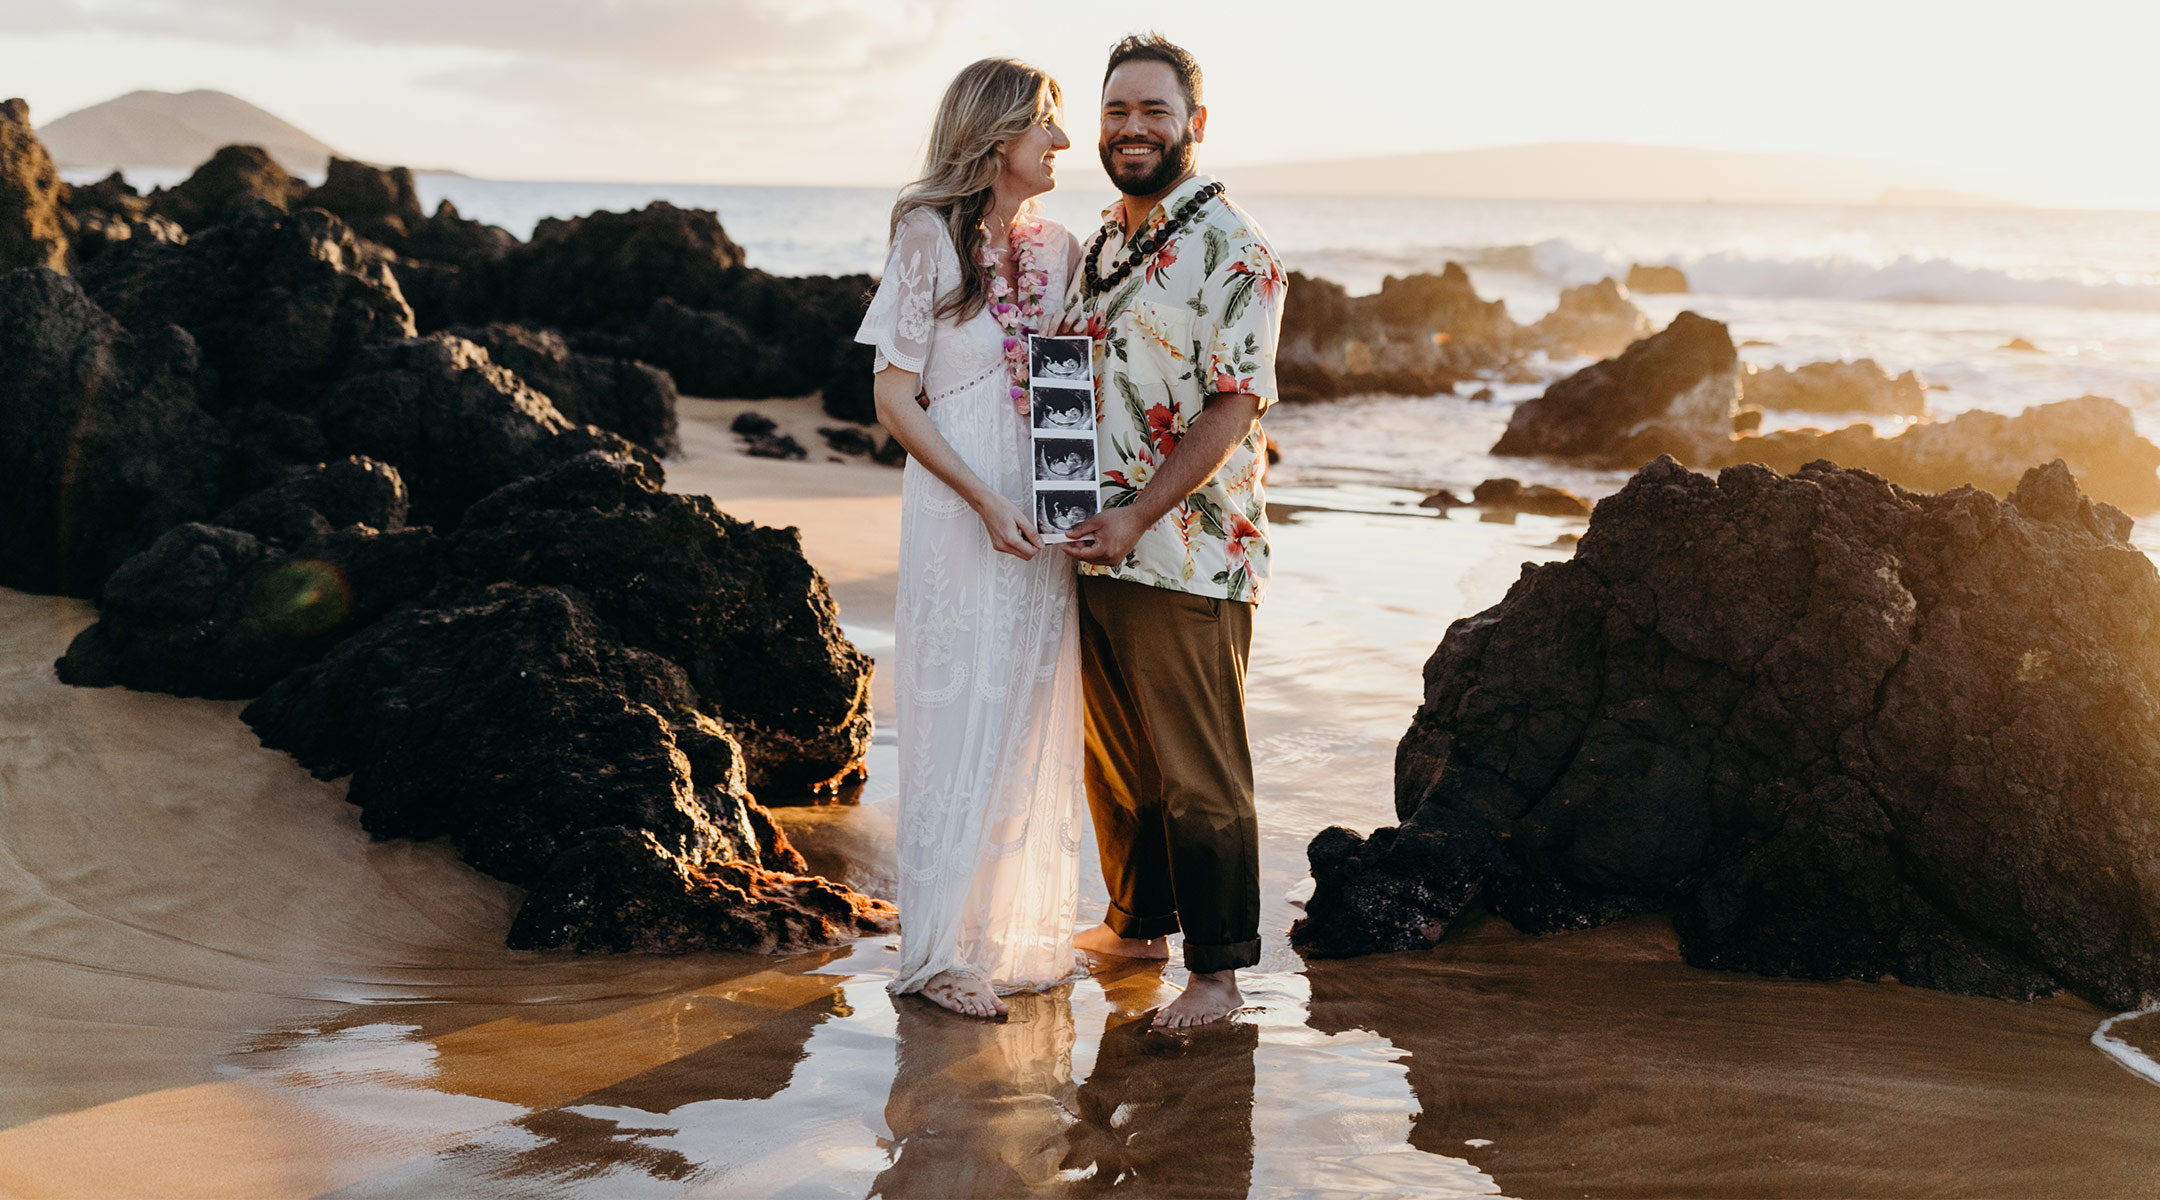 pregnant woman with her partner on babymoon in maui, hawaii